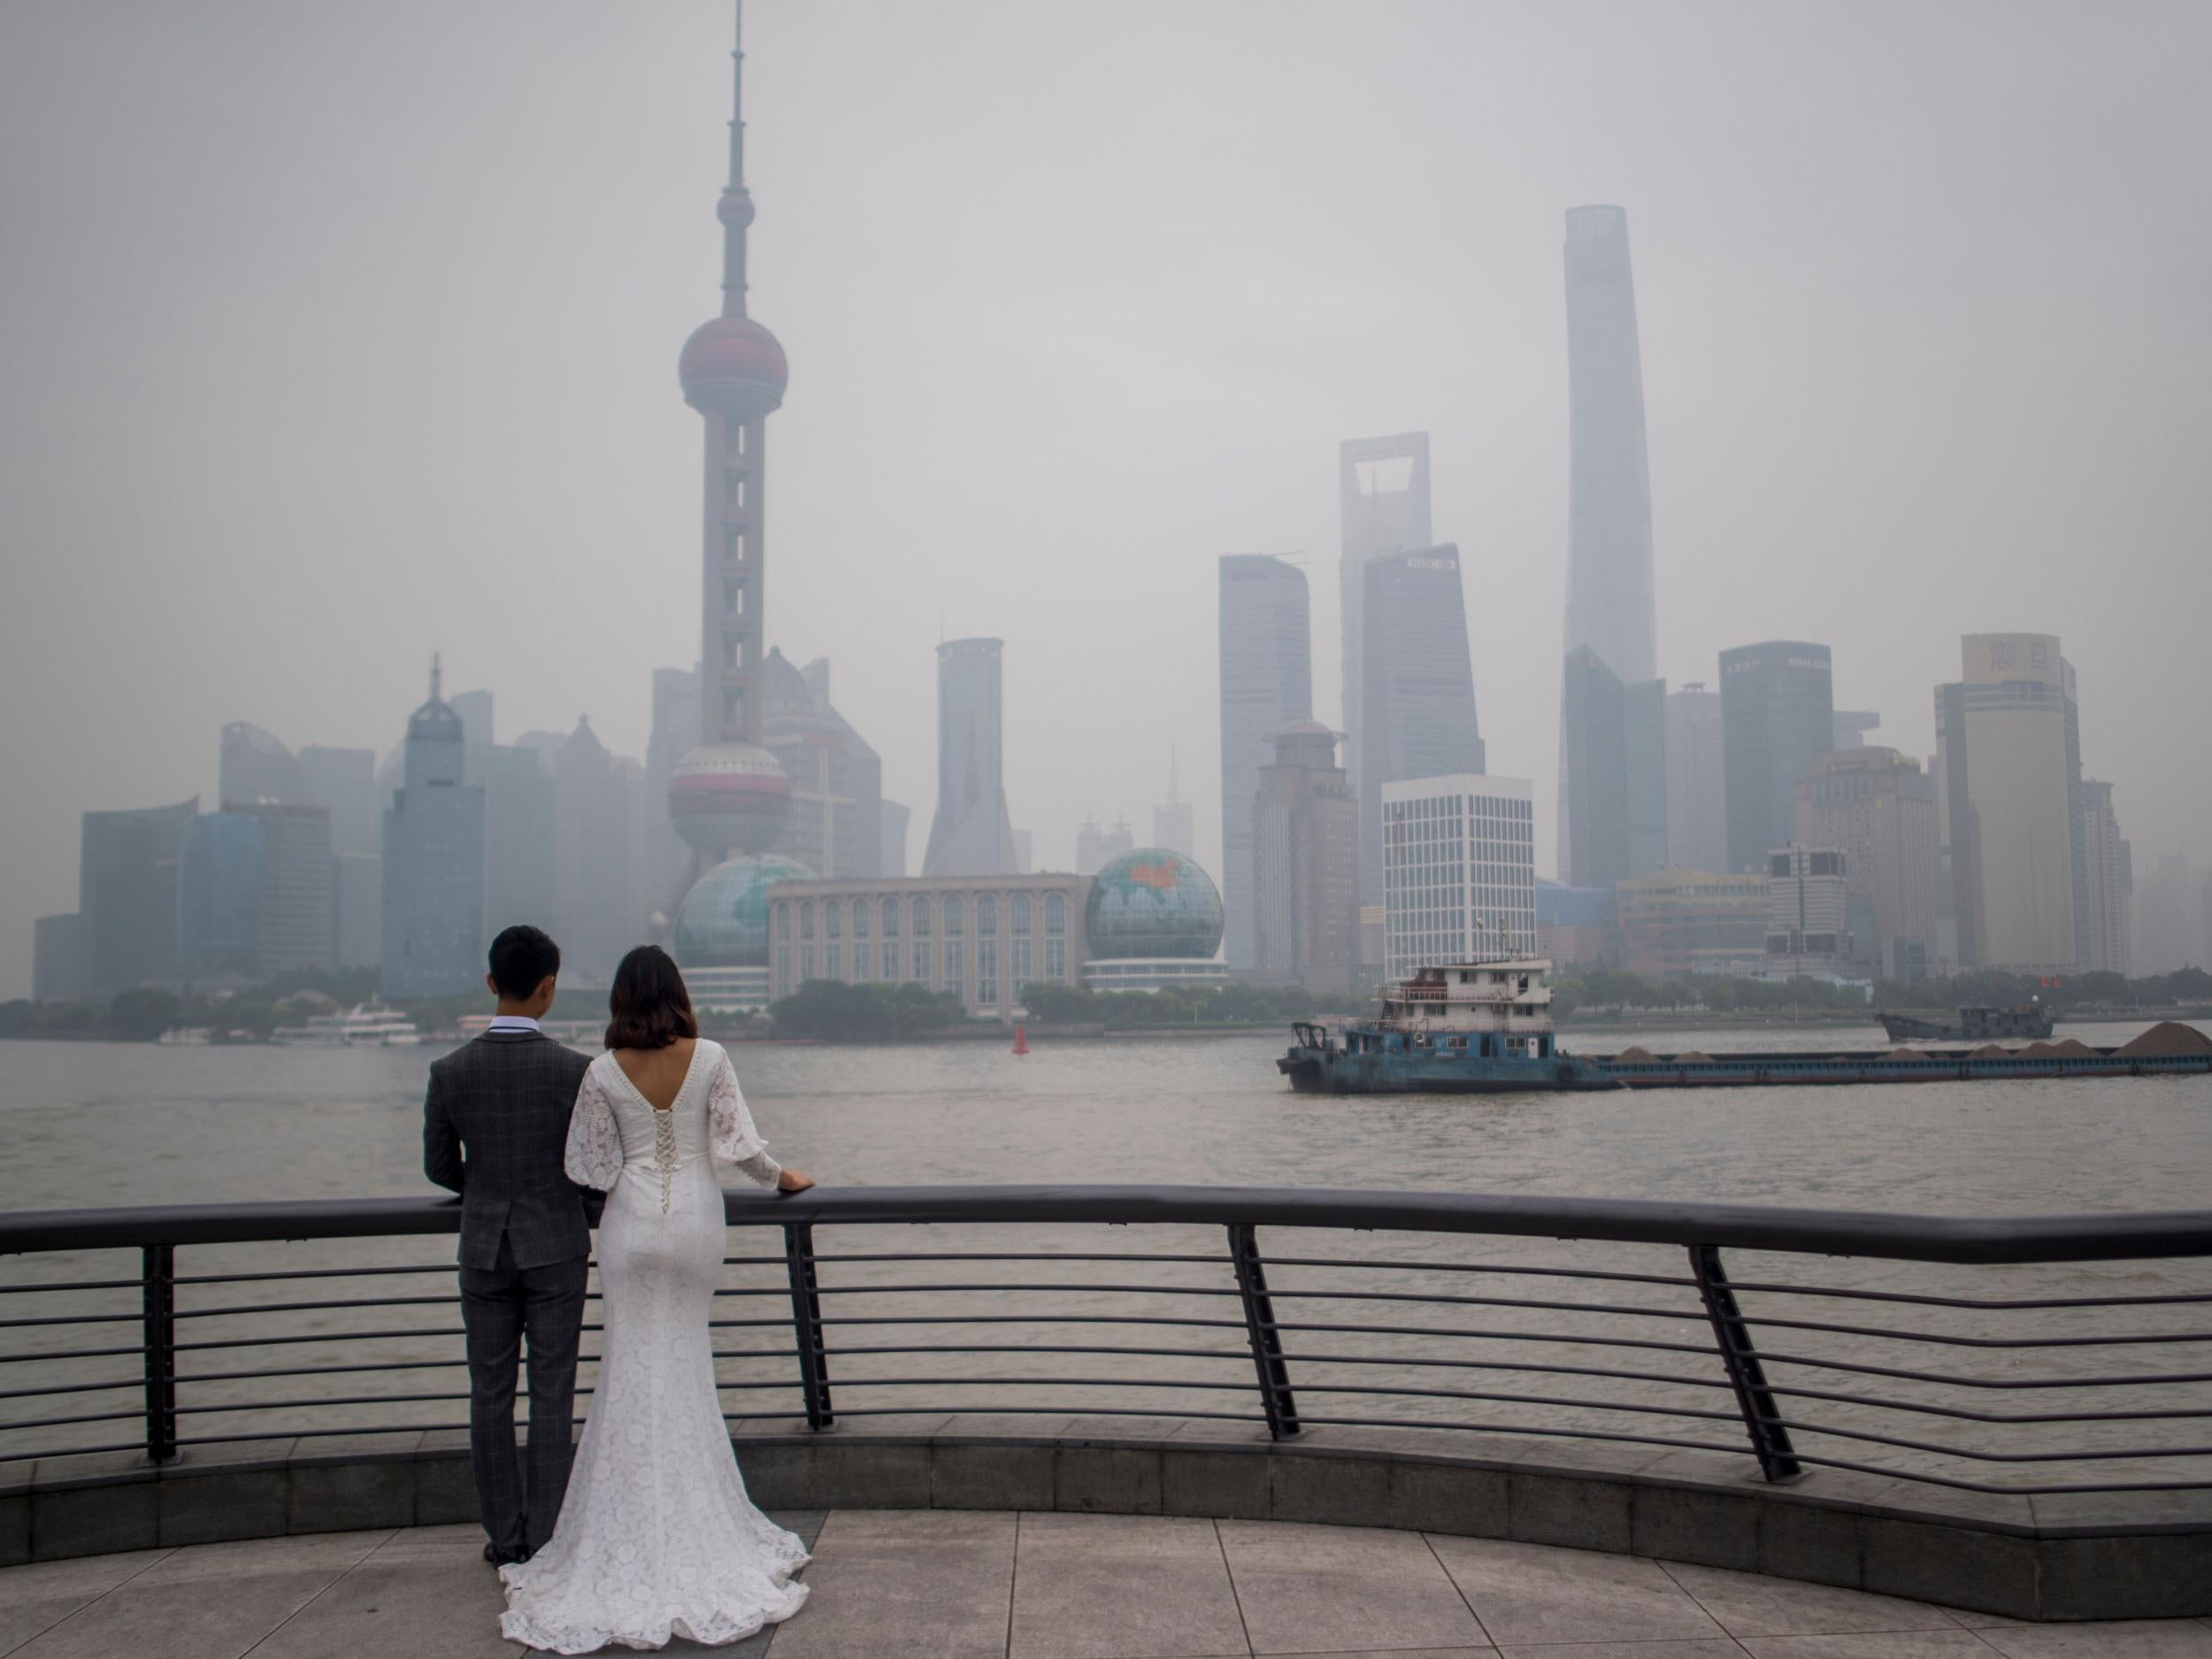 The woman, who remains anonymous, was duped into marrying a stranger from mainland China